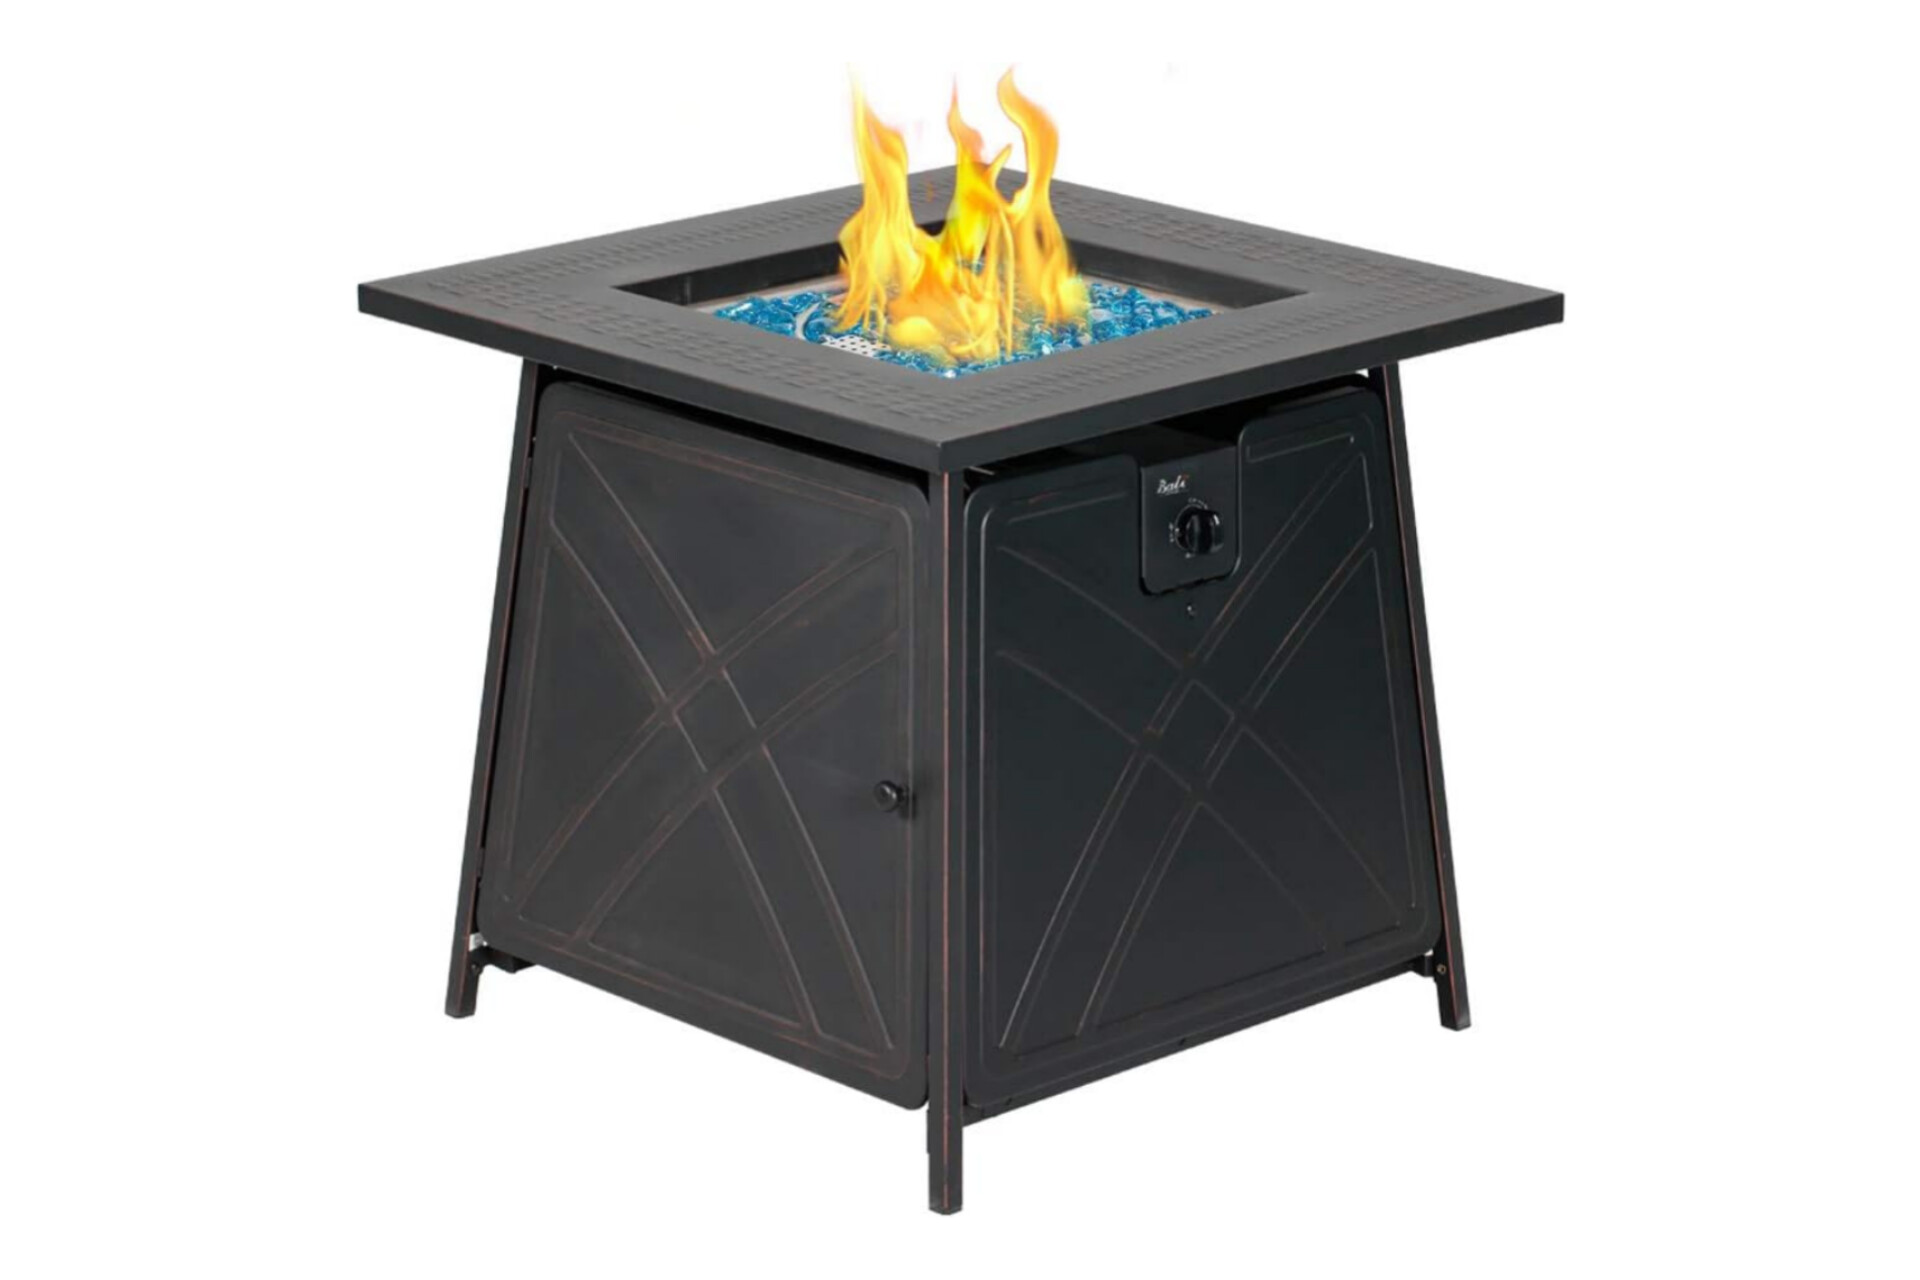 BALI OUTDOORS Propane Fire Pit Table